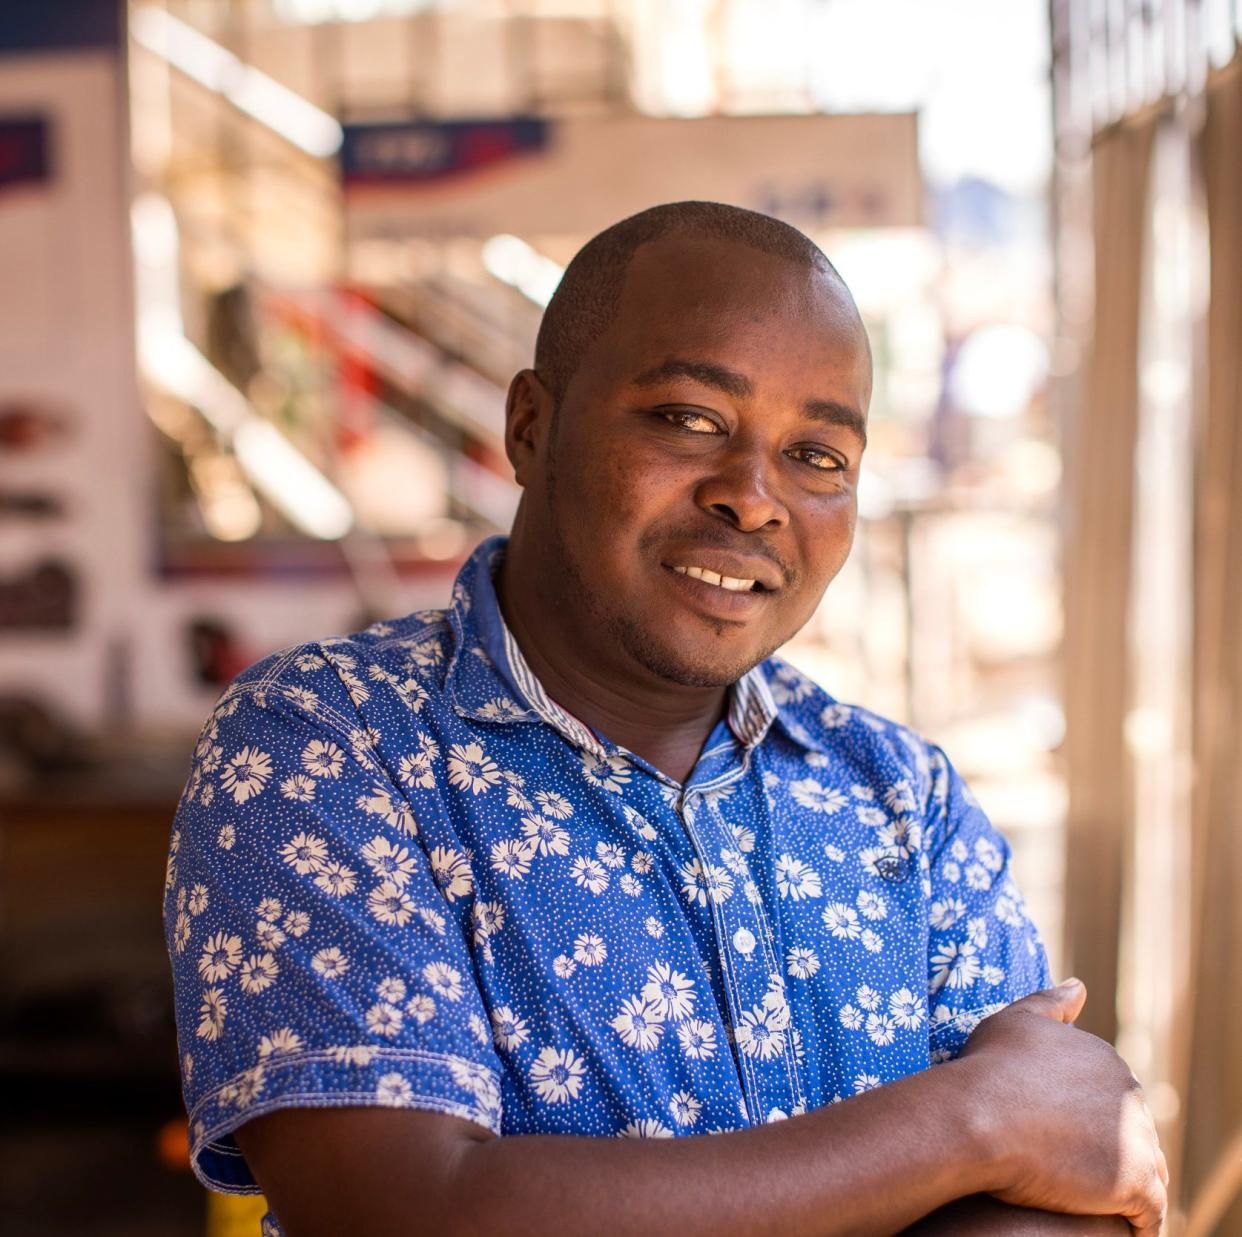 Elly Kegode has become a road safety advocate after he lost a finger and suffered a serious head injury in a crash